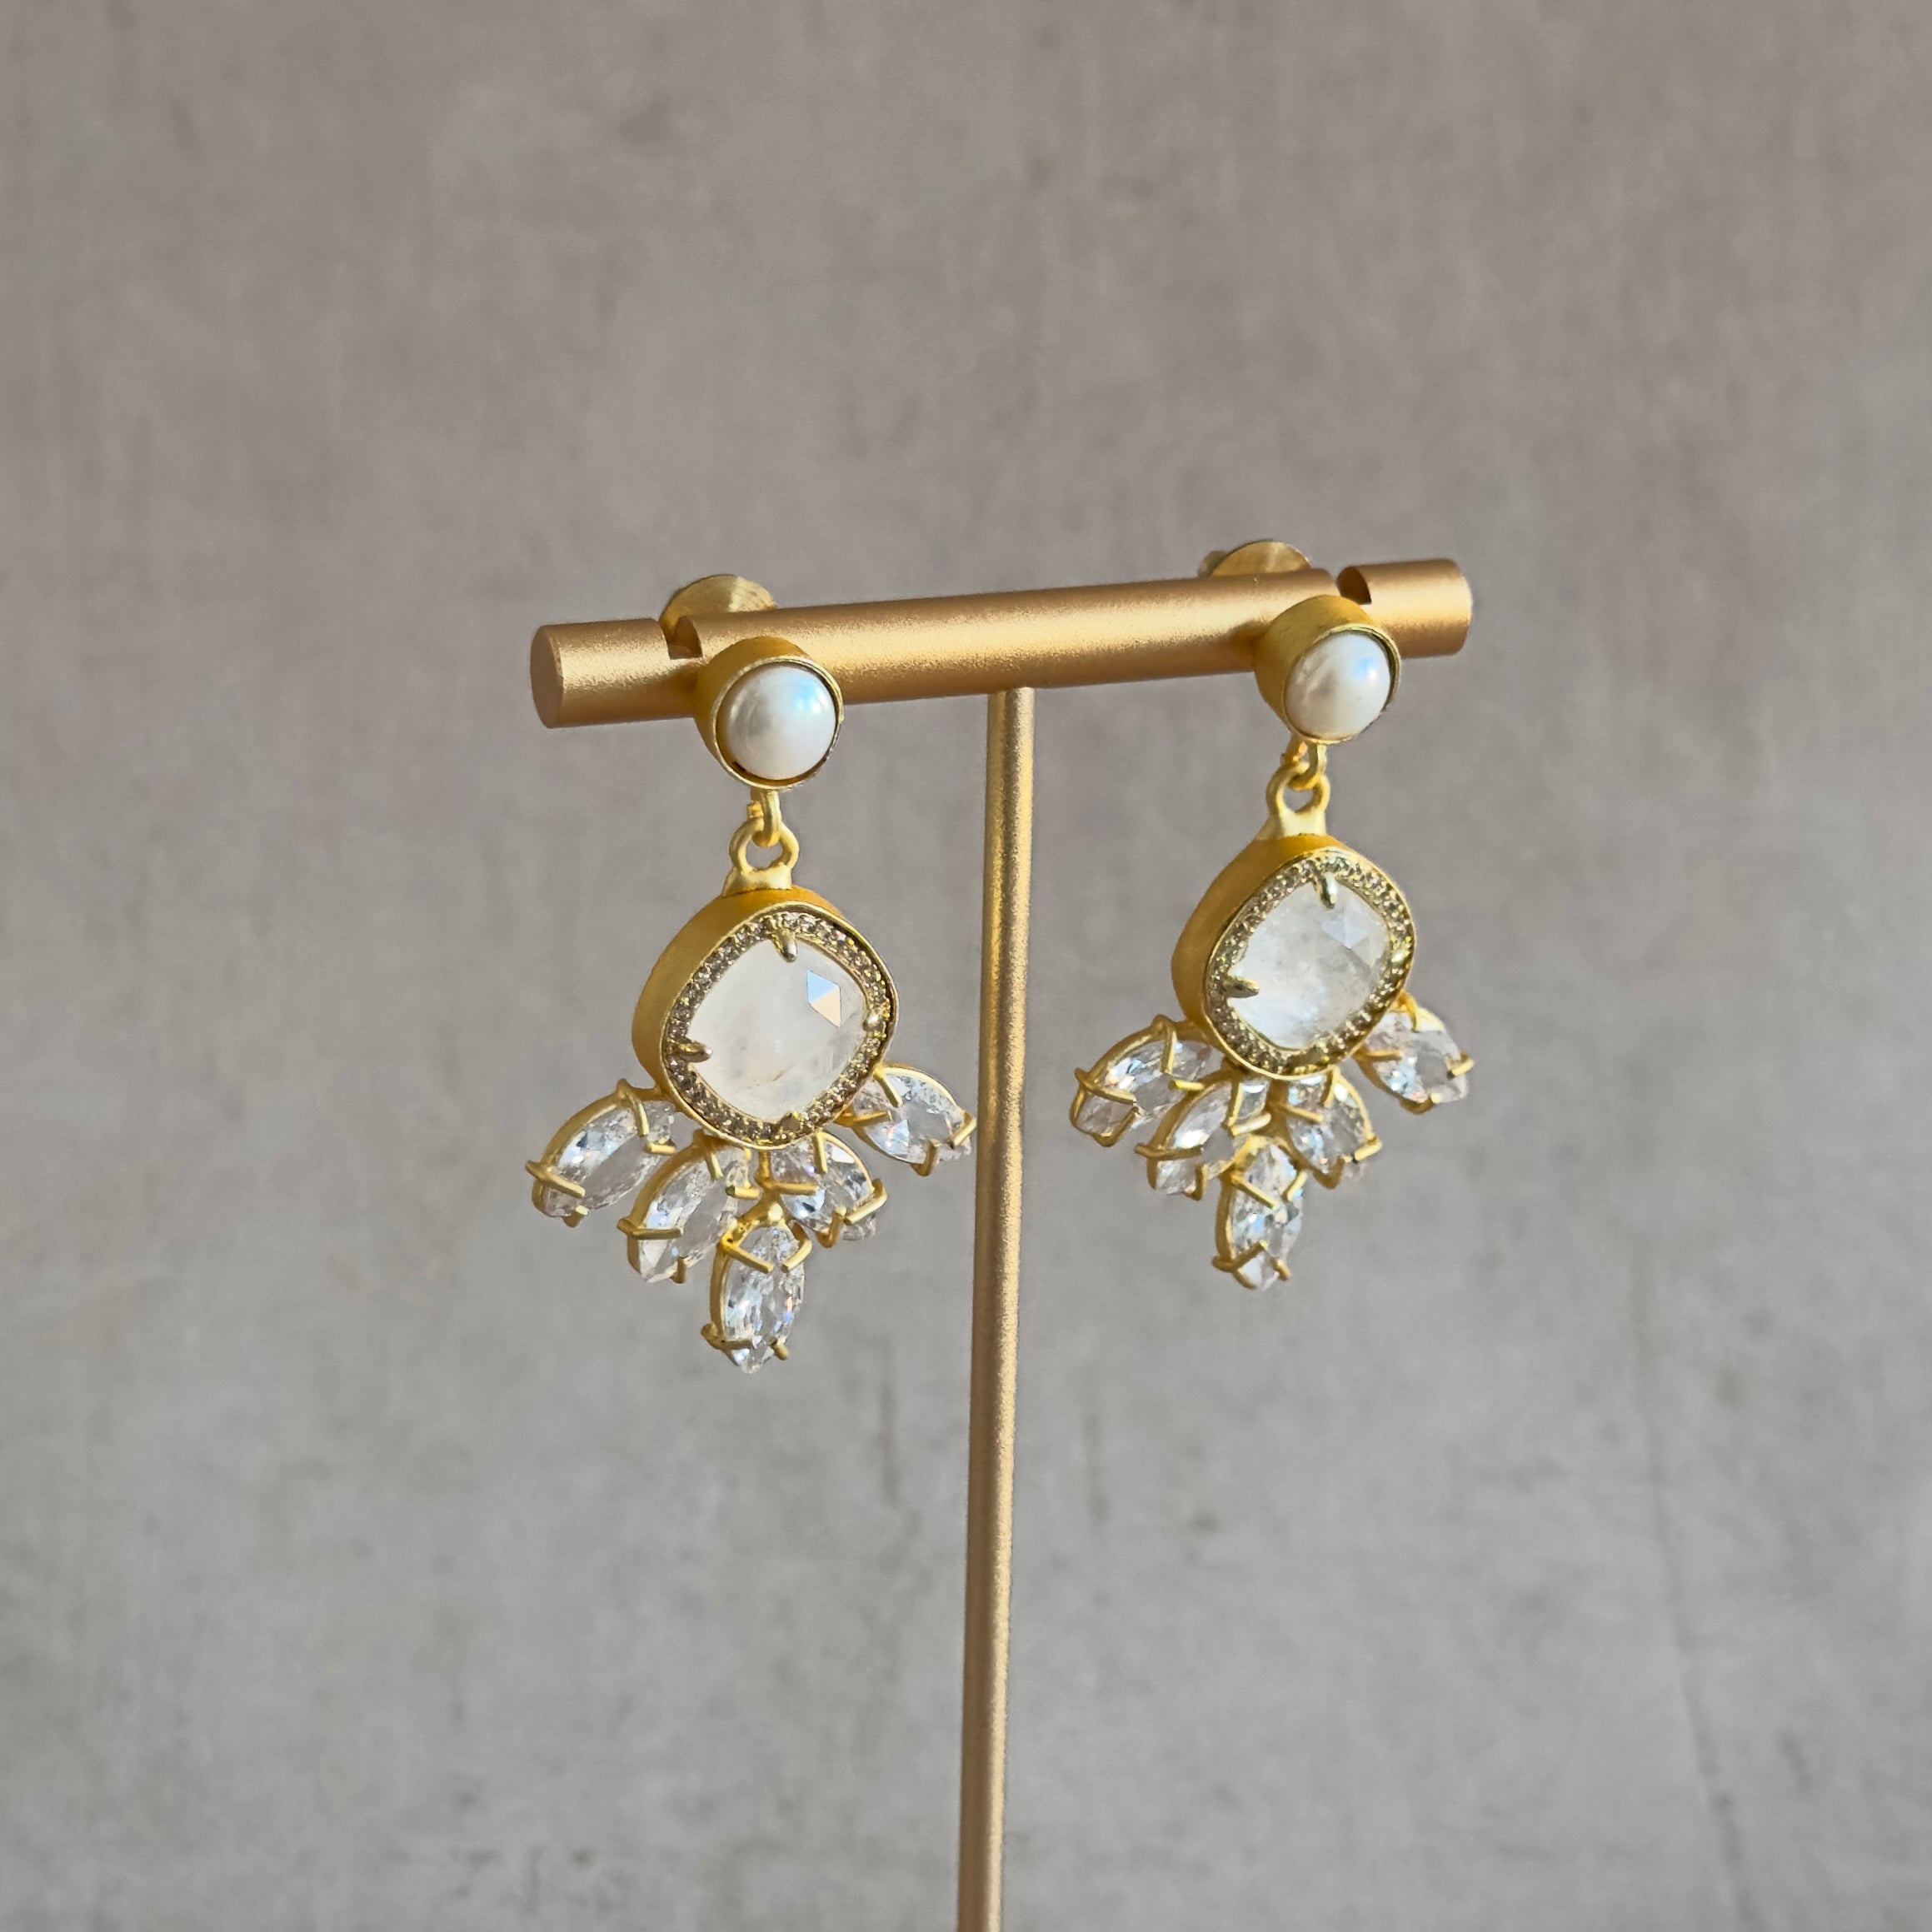 Add a touch of elegance to your outfit with our Crystal Drop Earrings! These beautiful earrings feature a shimmering white quartz crystal and cubic zirconia for extra sparkle. Elevate your style with these stunning earrings that will catch the eye of everyone around you.